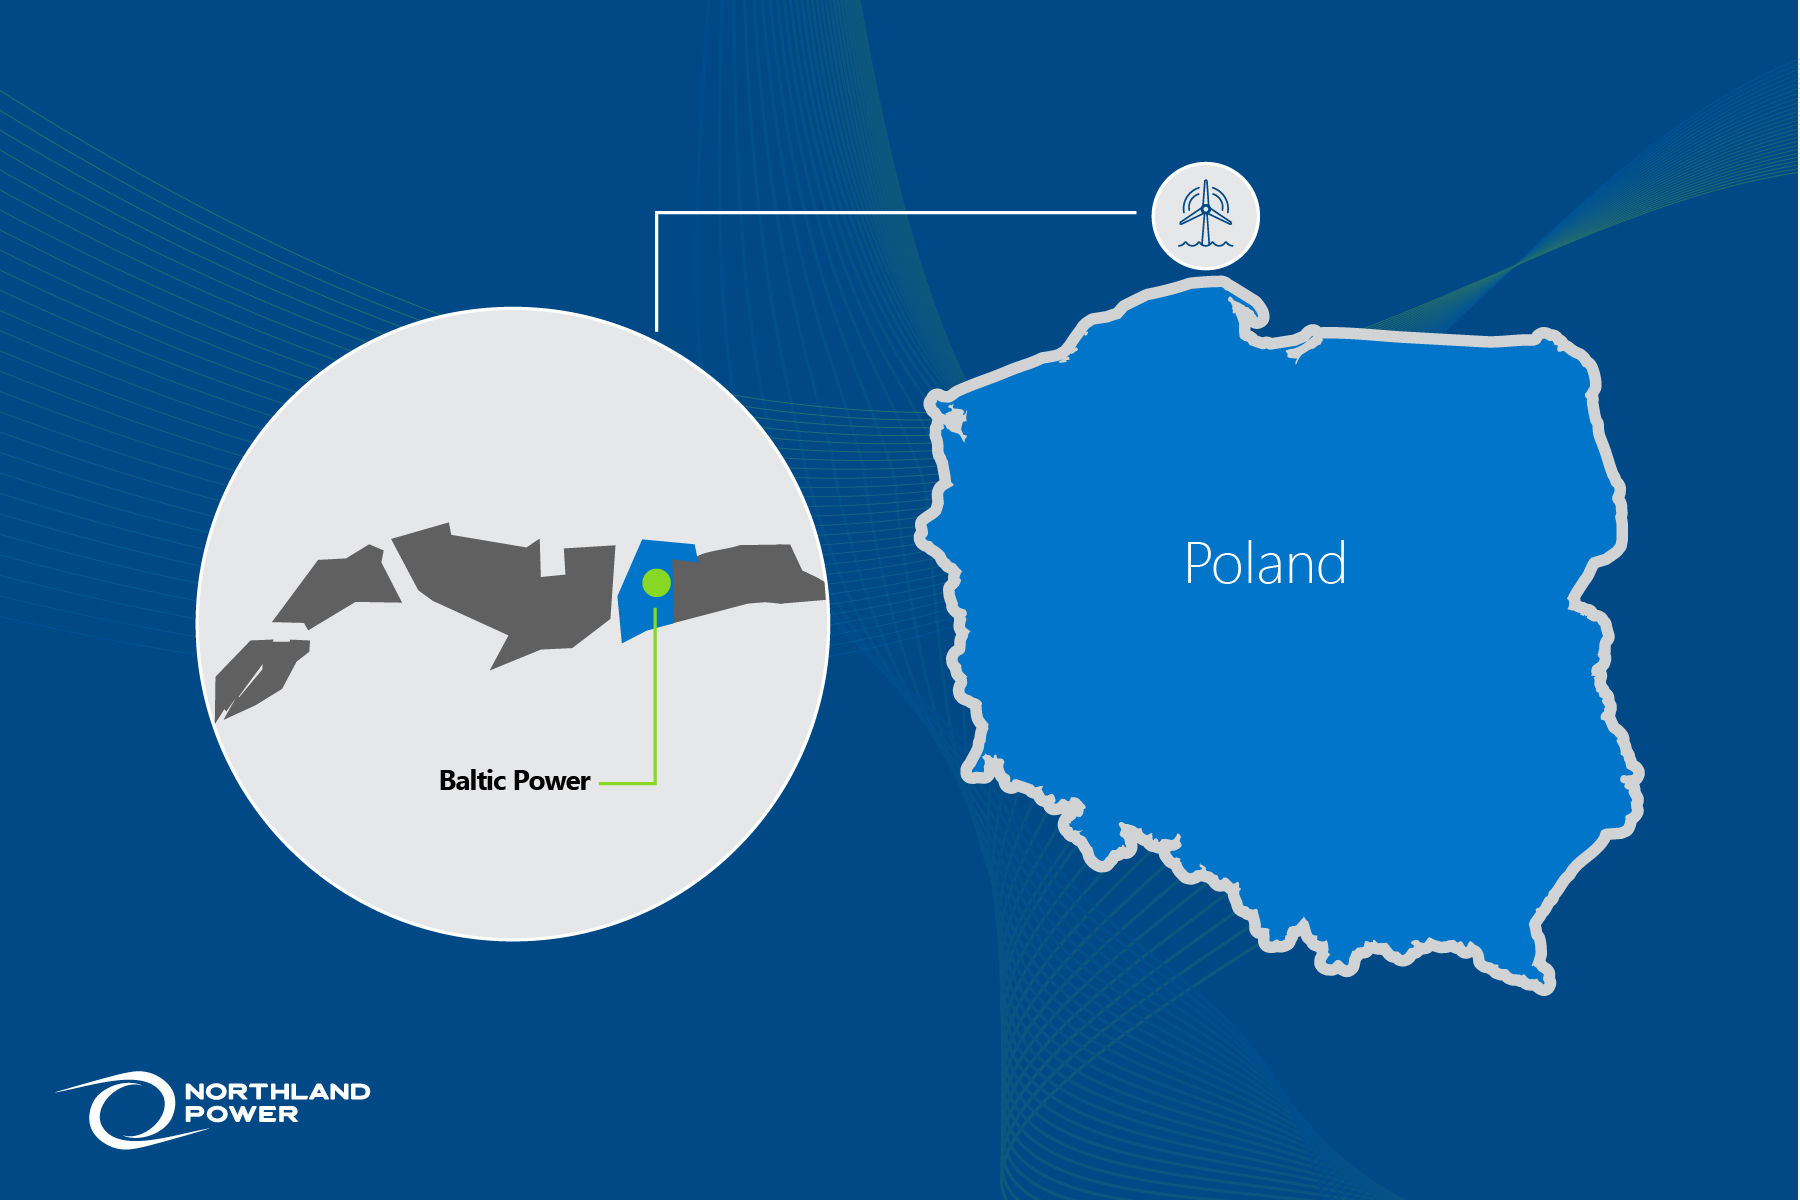 POLAND PROSPECTING: Northland Power has tied-up with Polish petro-player Orlen to develop the 1.1GW Baltic Power megaproject (IMAGE: Northland Power) 